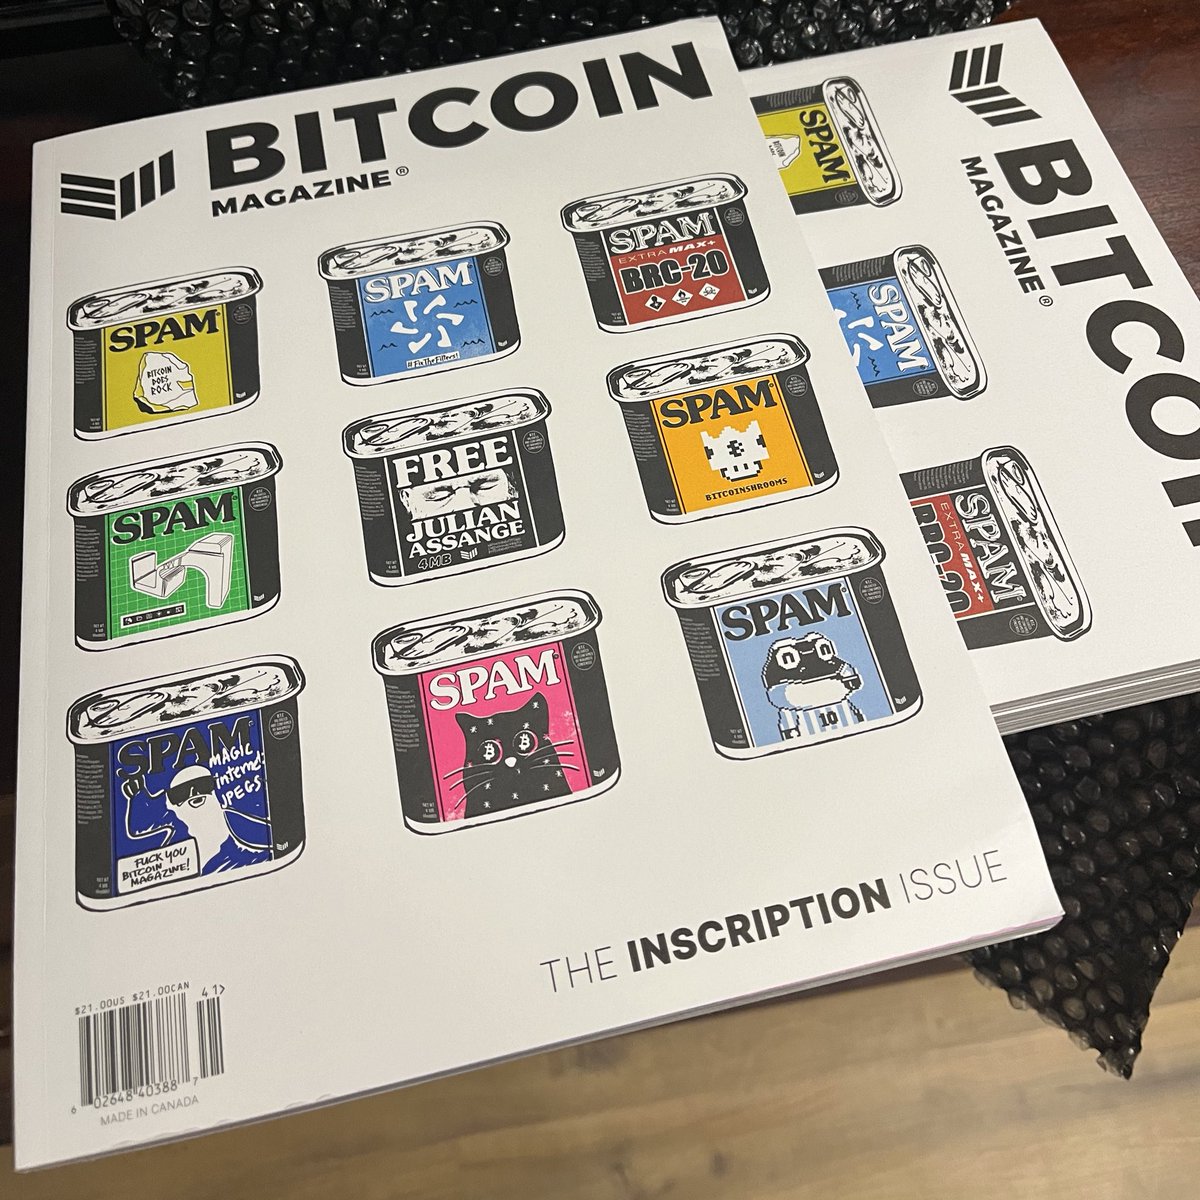 Holy shit this looks awesome! My Op-Ed about Bitcoin Stamps! Great type-setting and design @BitcoinMagazine. Thanks again for the opportunity @markgoodw_in @DavidFBailey